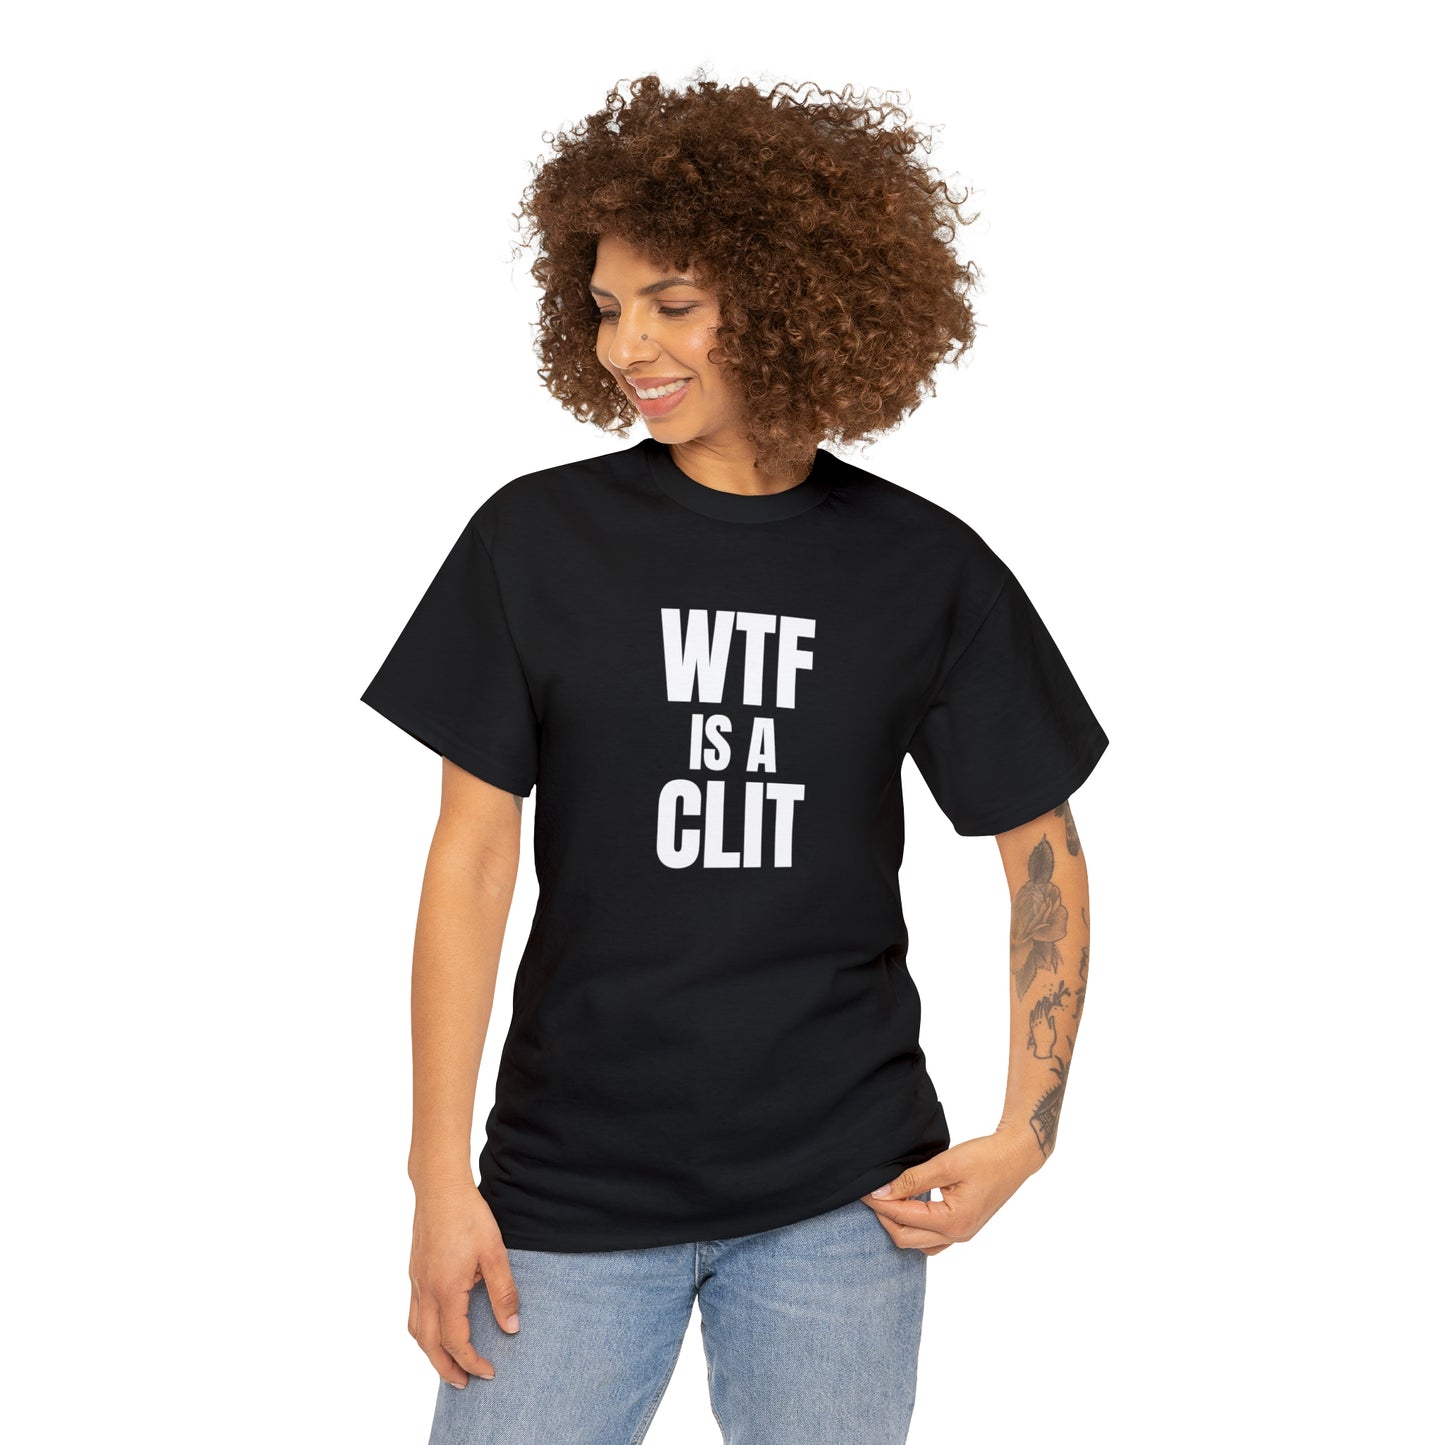 WTF IS A CLIT